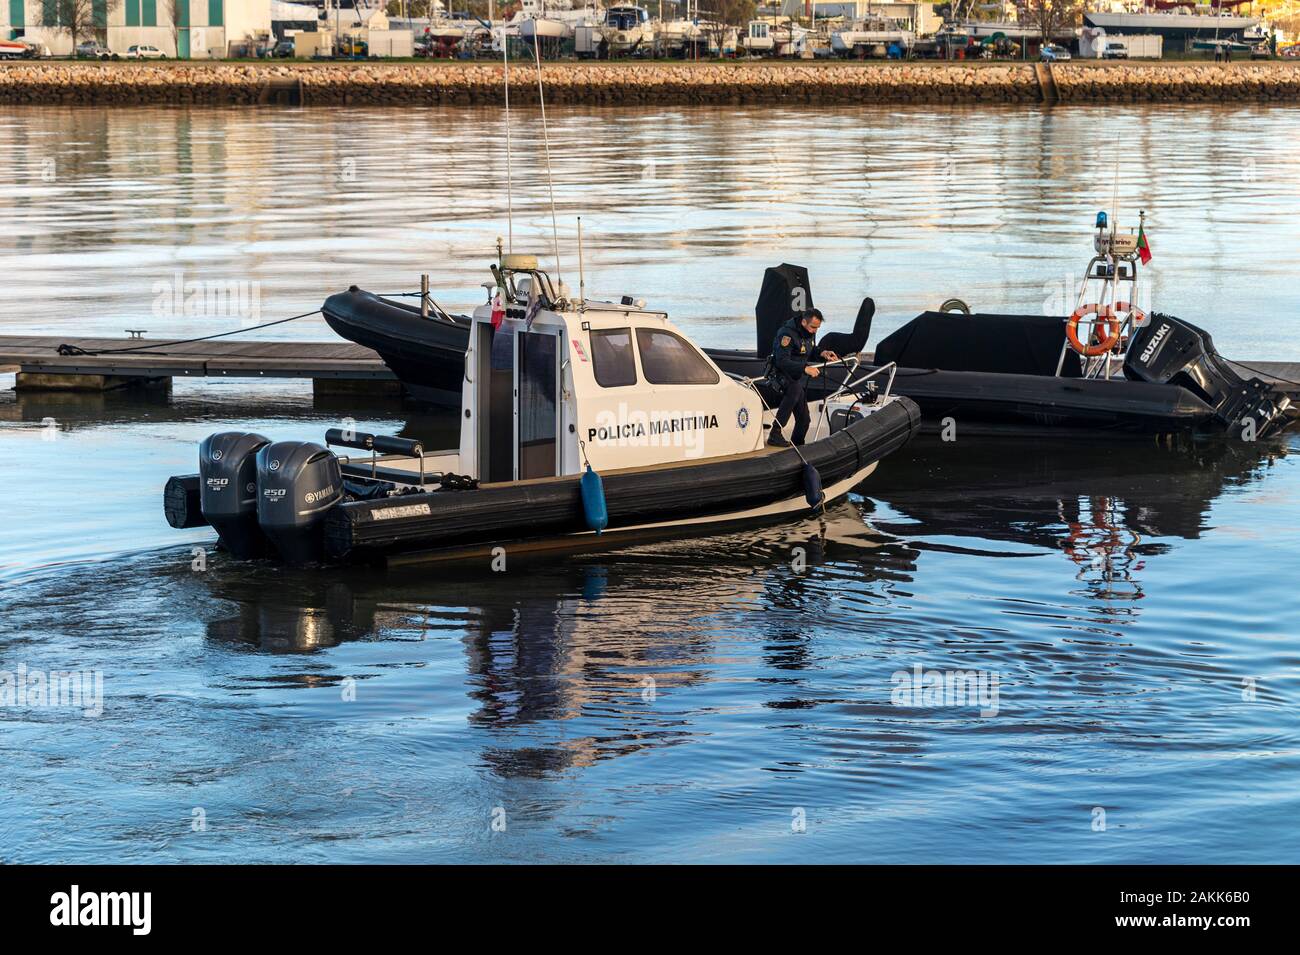 Portuguese Maritime Police patrol coming into harbour Stock Photo